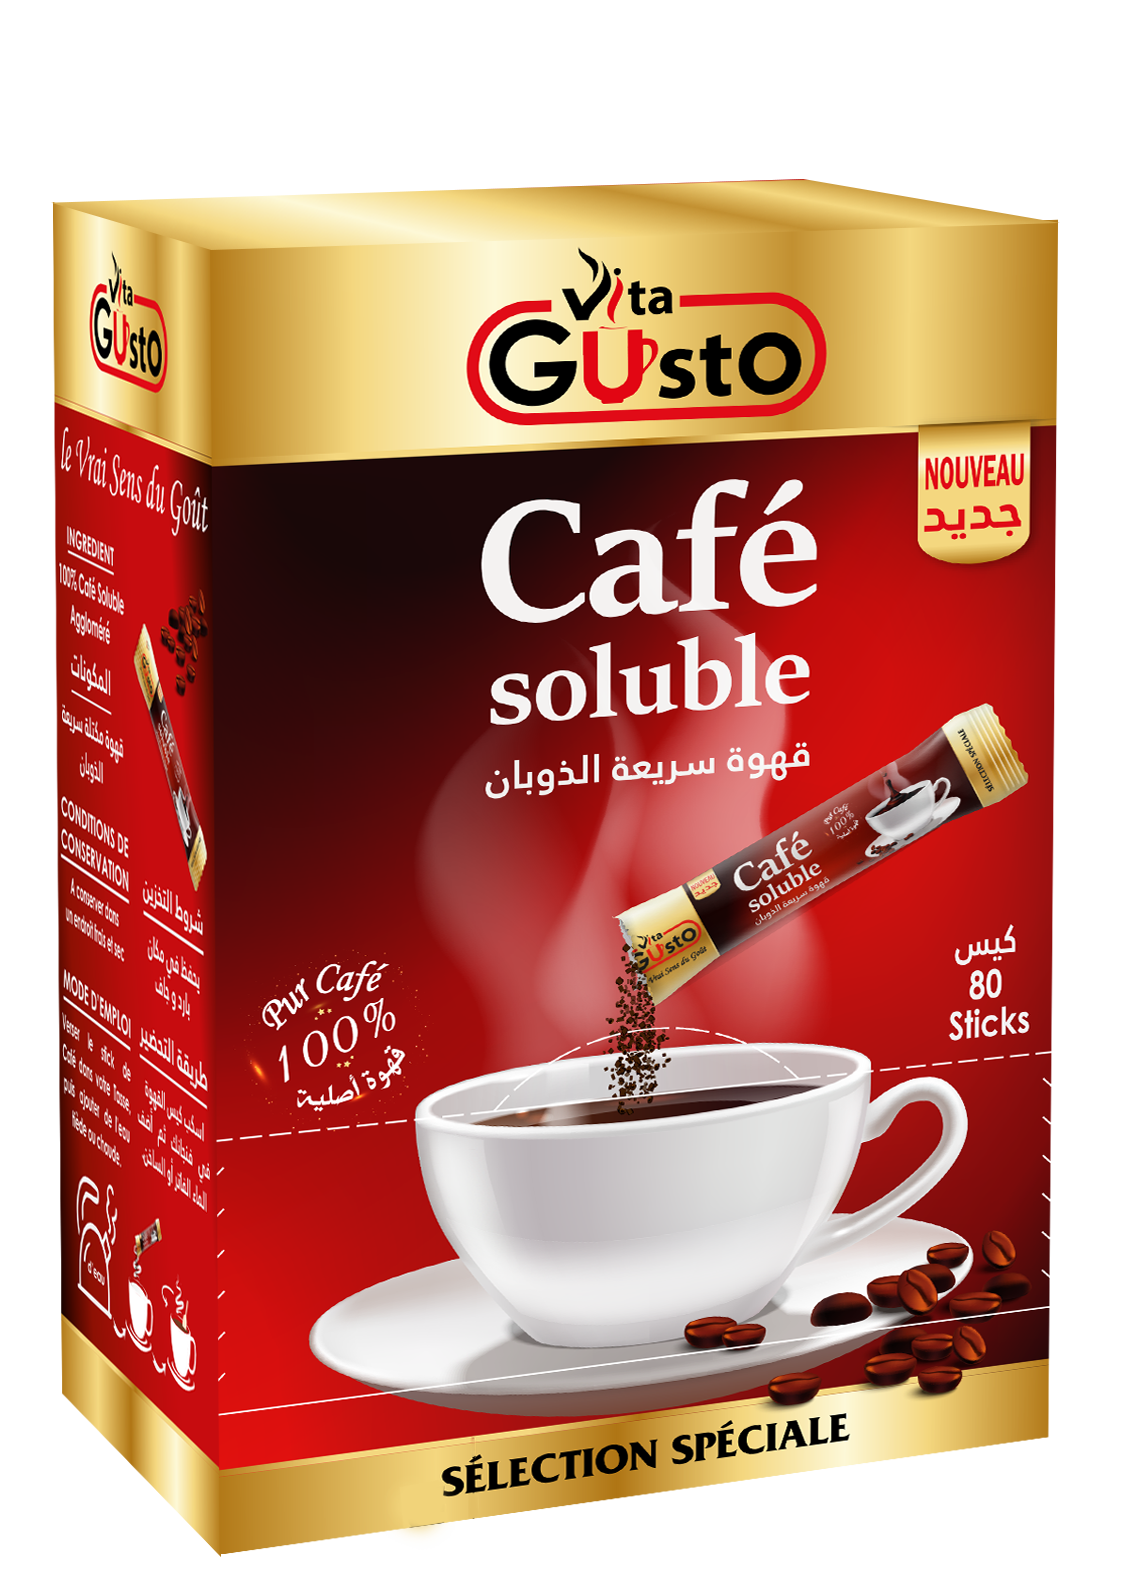 https://www.agrofoodindustrie.com/wp-content/uploads/2021/12/Presentoir-VITAGUSTO-coffee.png